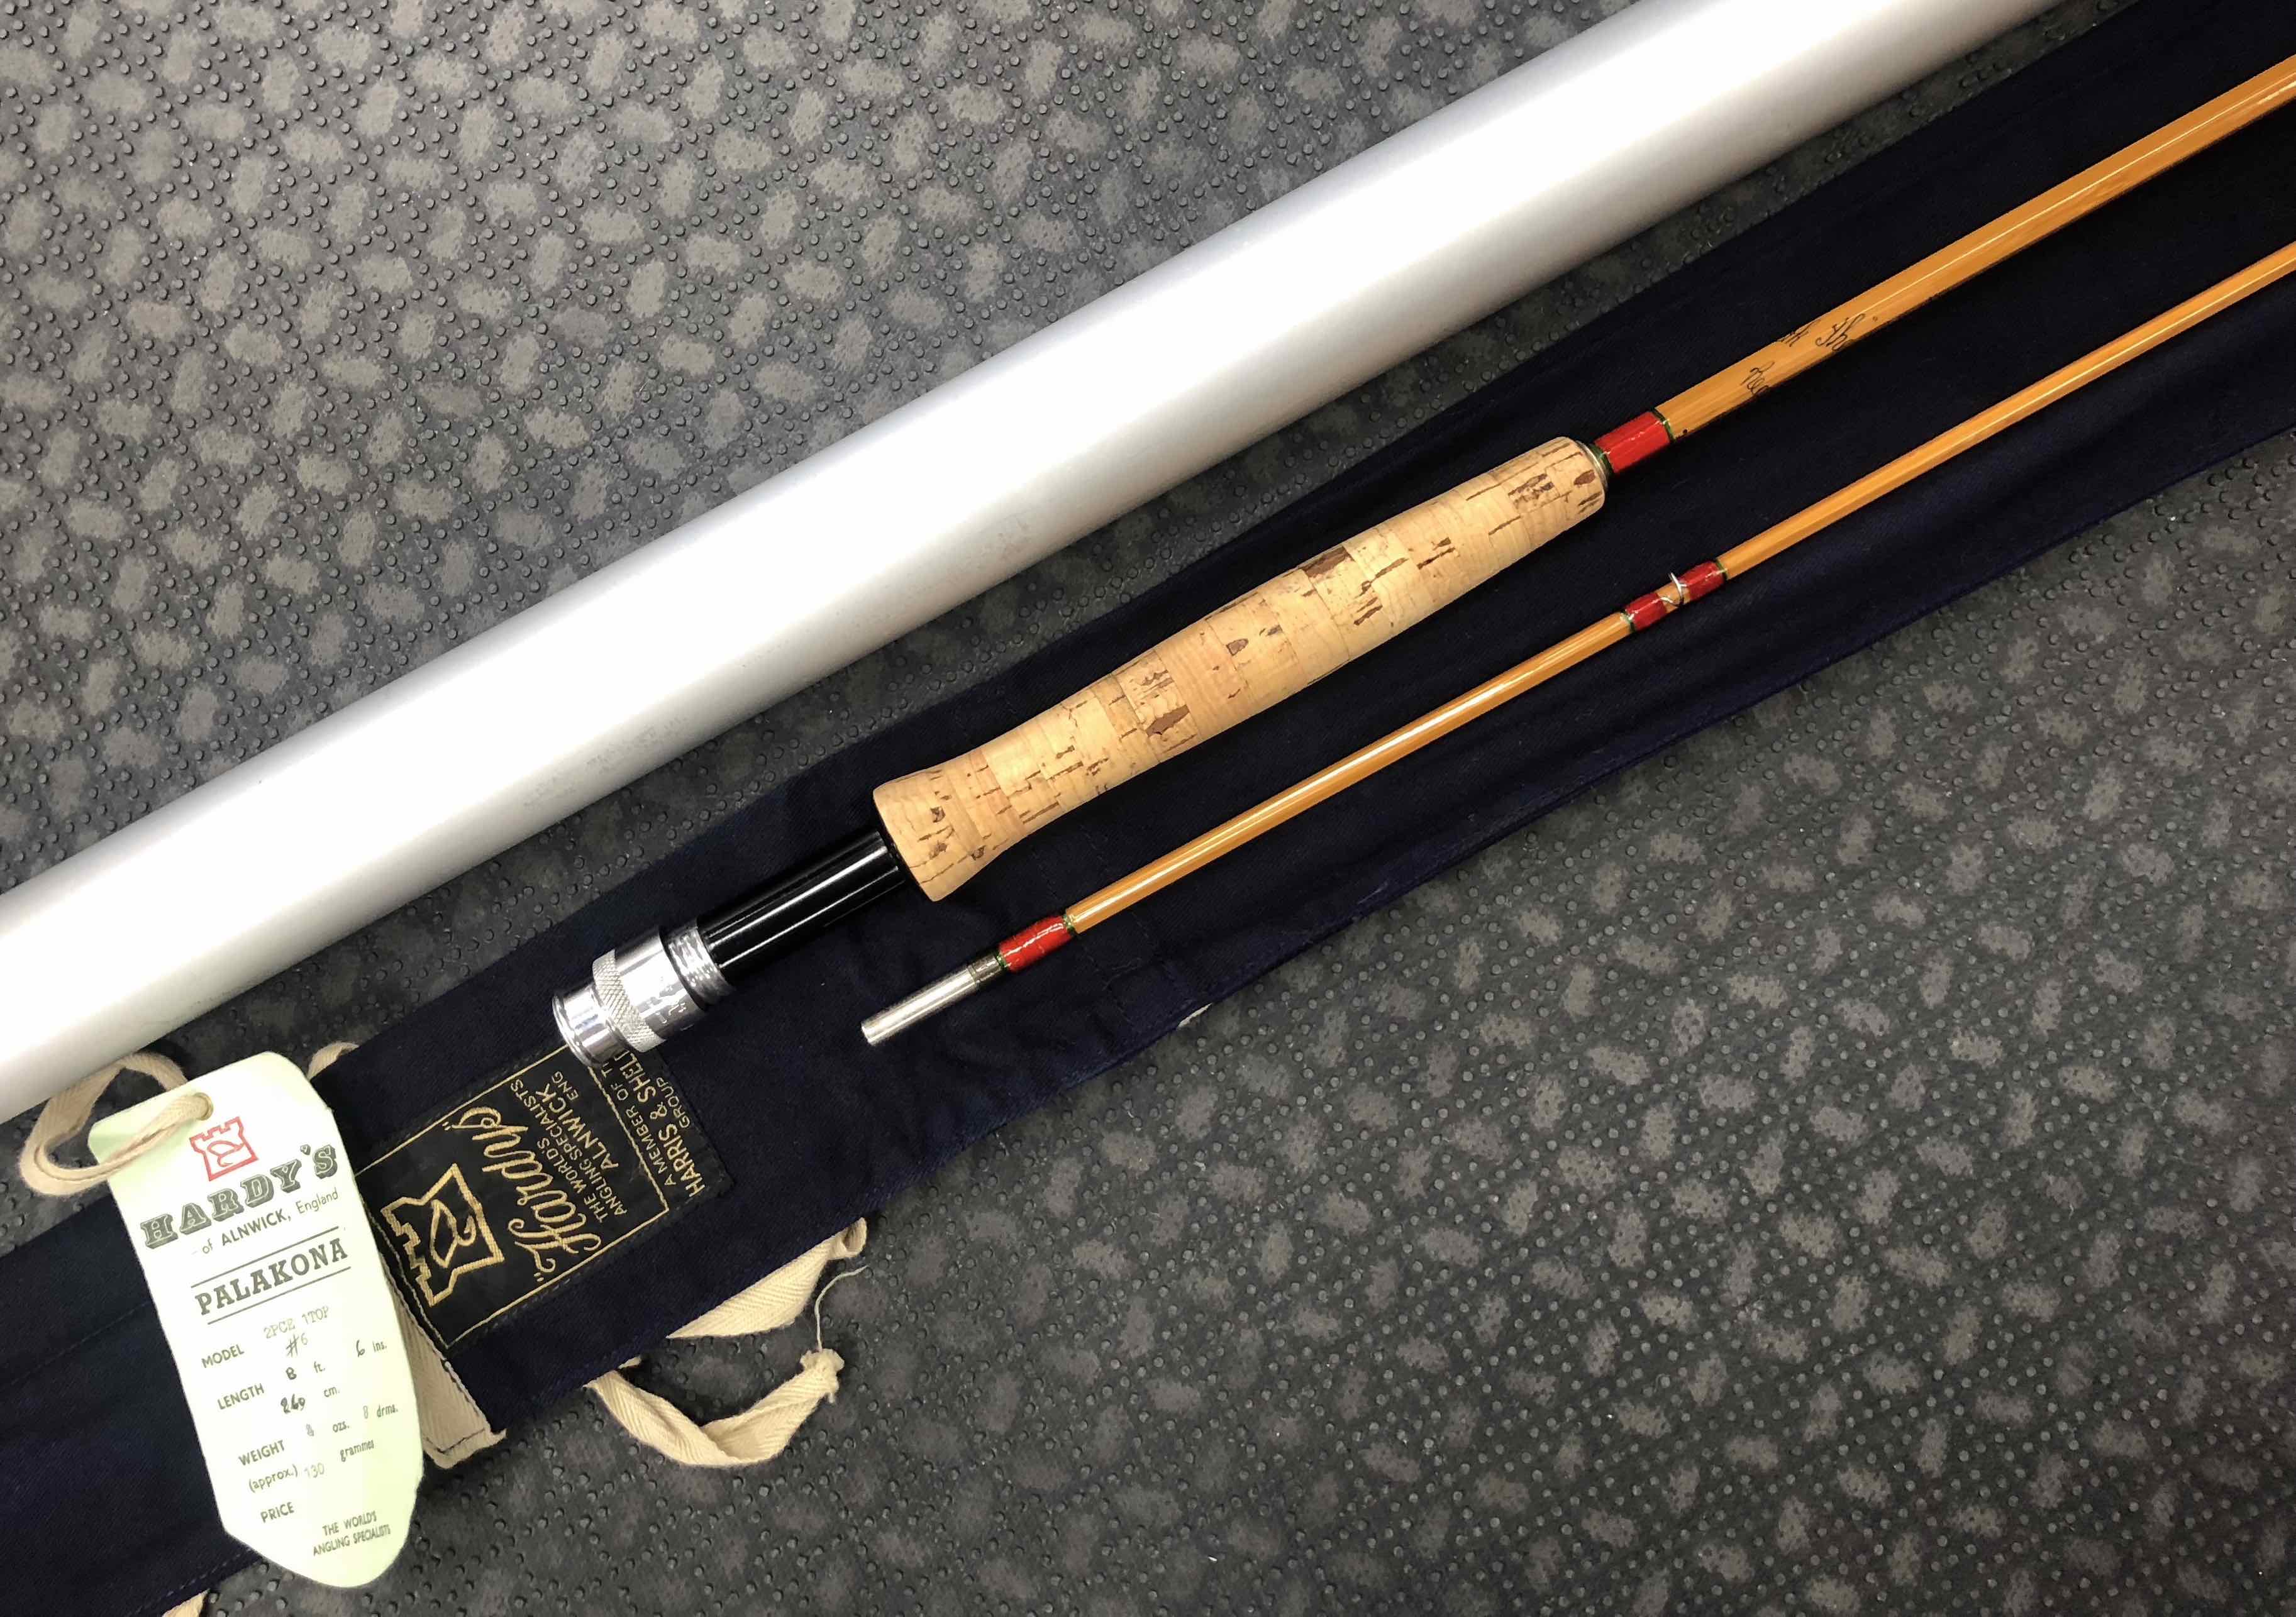 https://thefirstcast.ca/wp-content/uploads/2018/03/Hardy-Palakona-2piece-Cane-Bamboo-Fly-Rod-8foot-6inch-6weight-EE.jpg